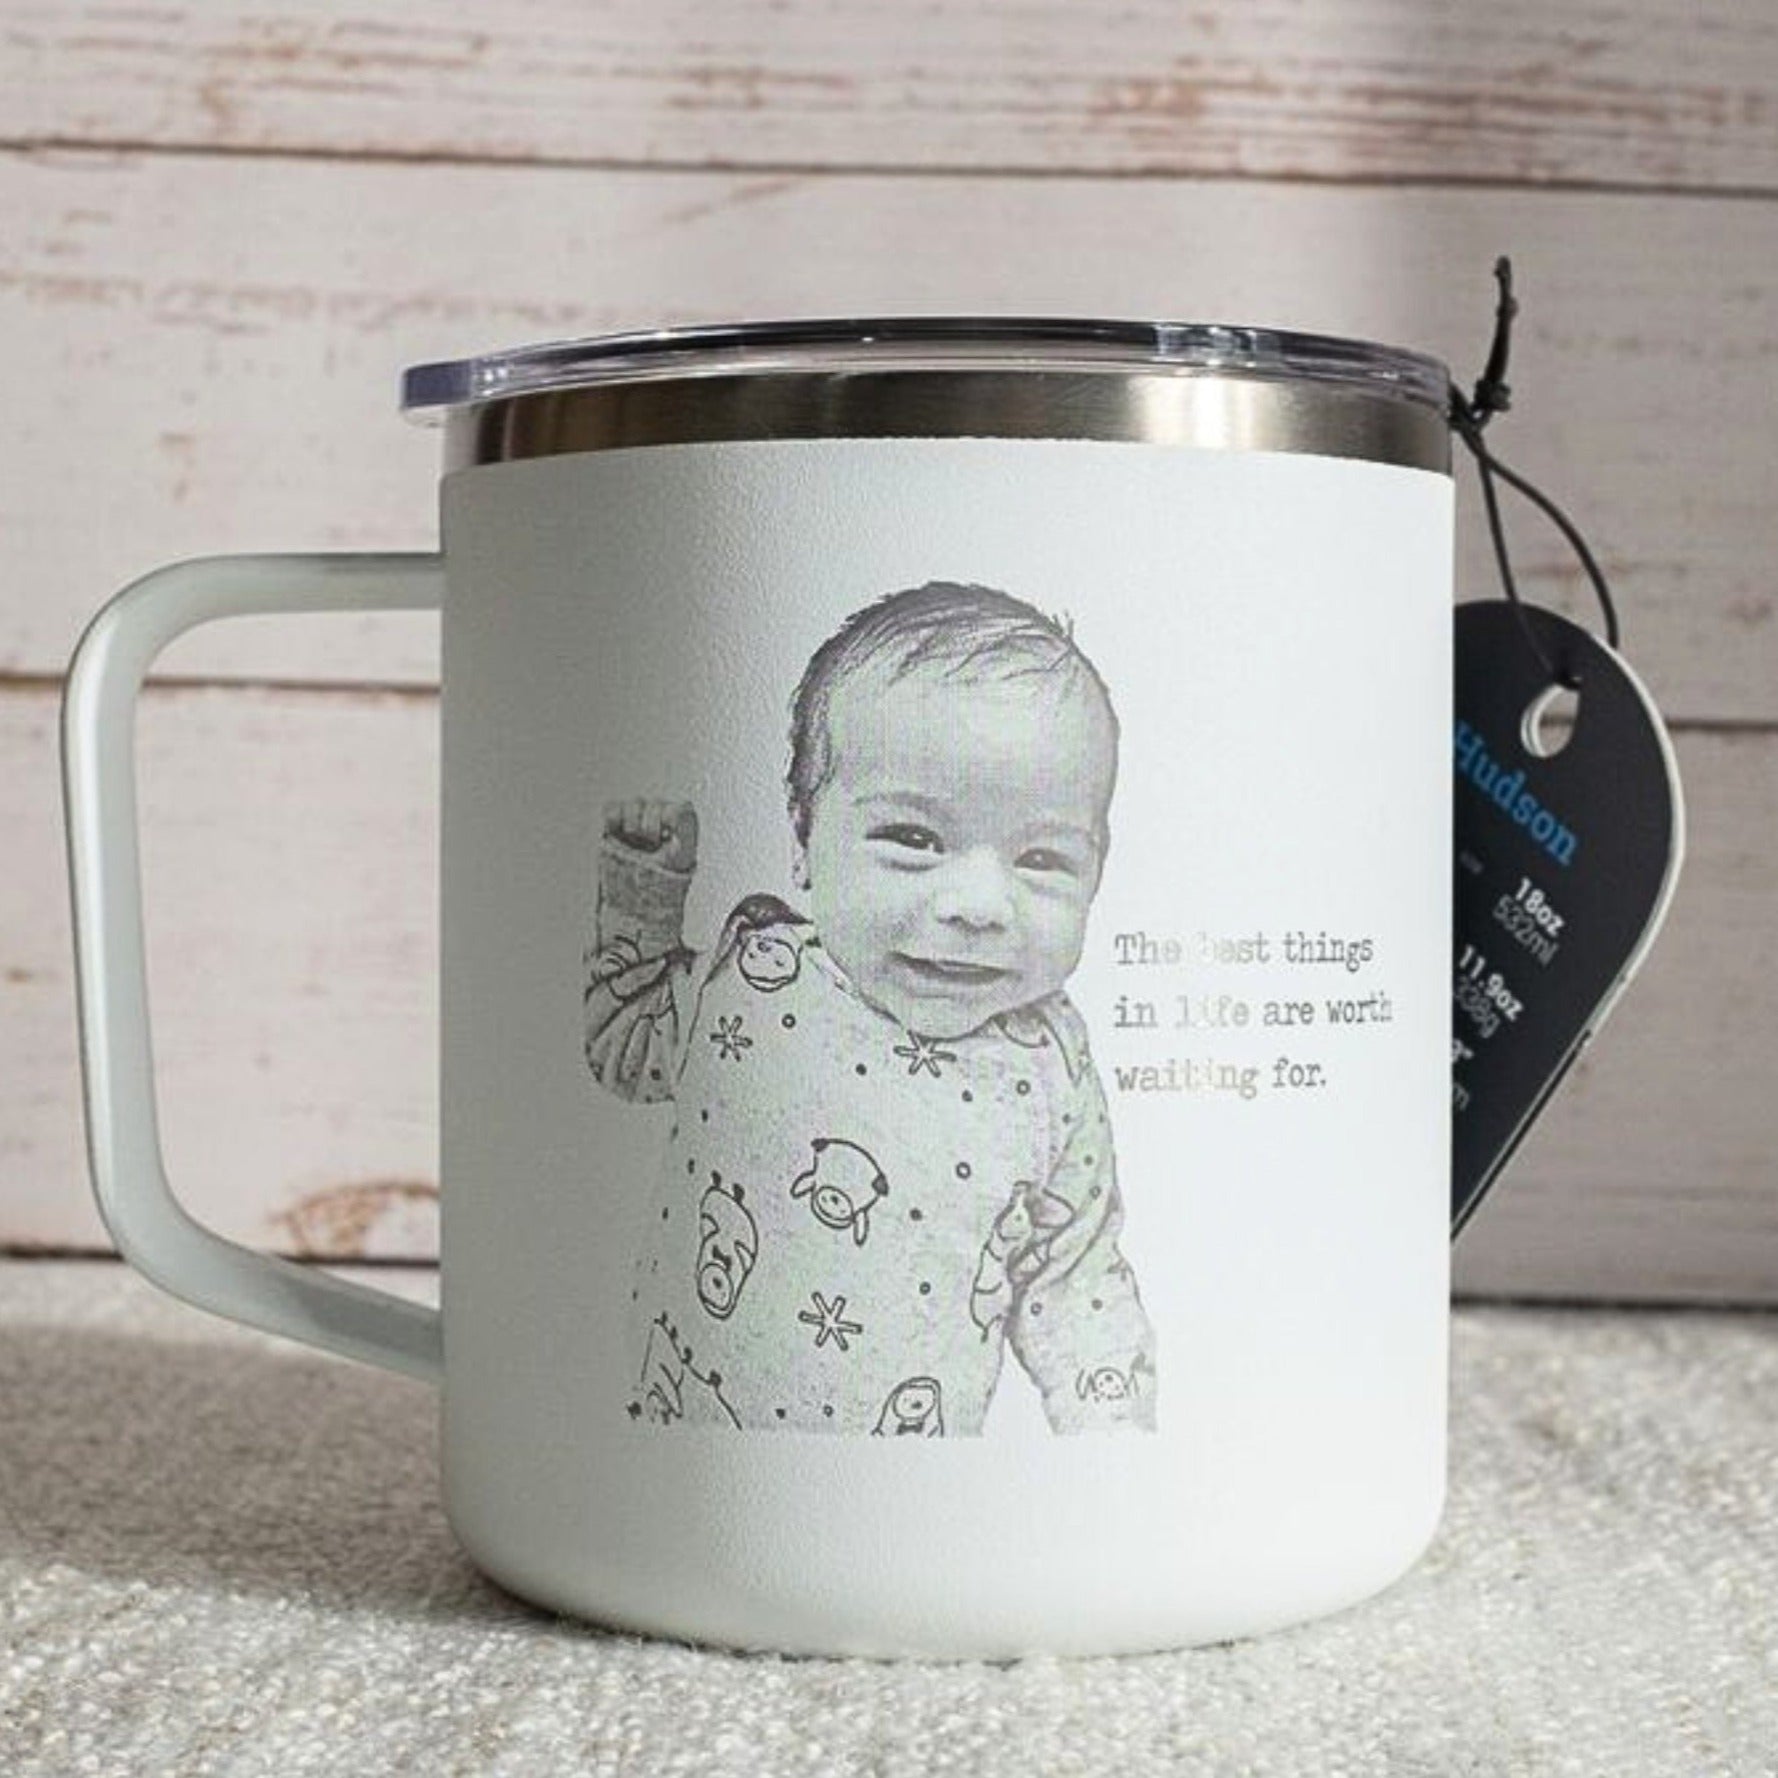 Personalized Mother's Day gift ideas featuring custom engraved mugs and tumblers in elegant black and white, perfect for celebrating and honoring mothers with heartfelt, meaningful messages.